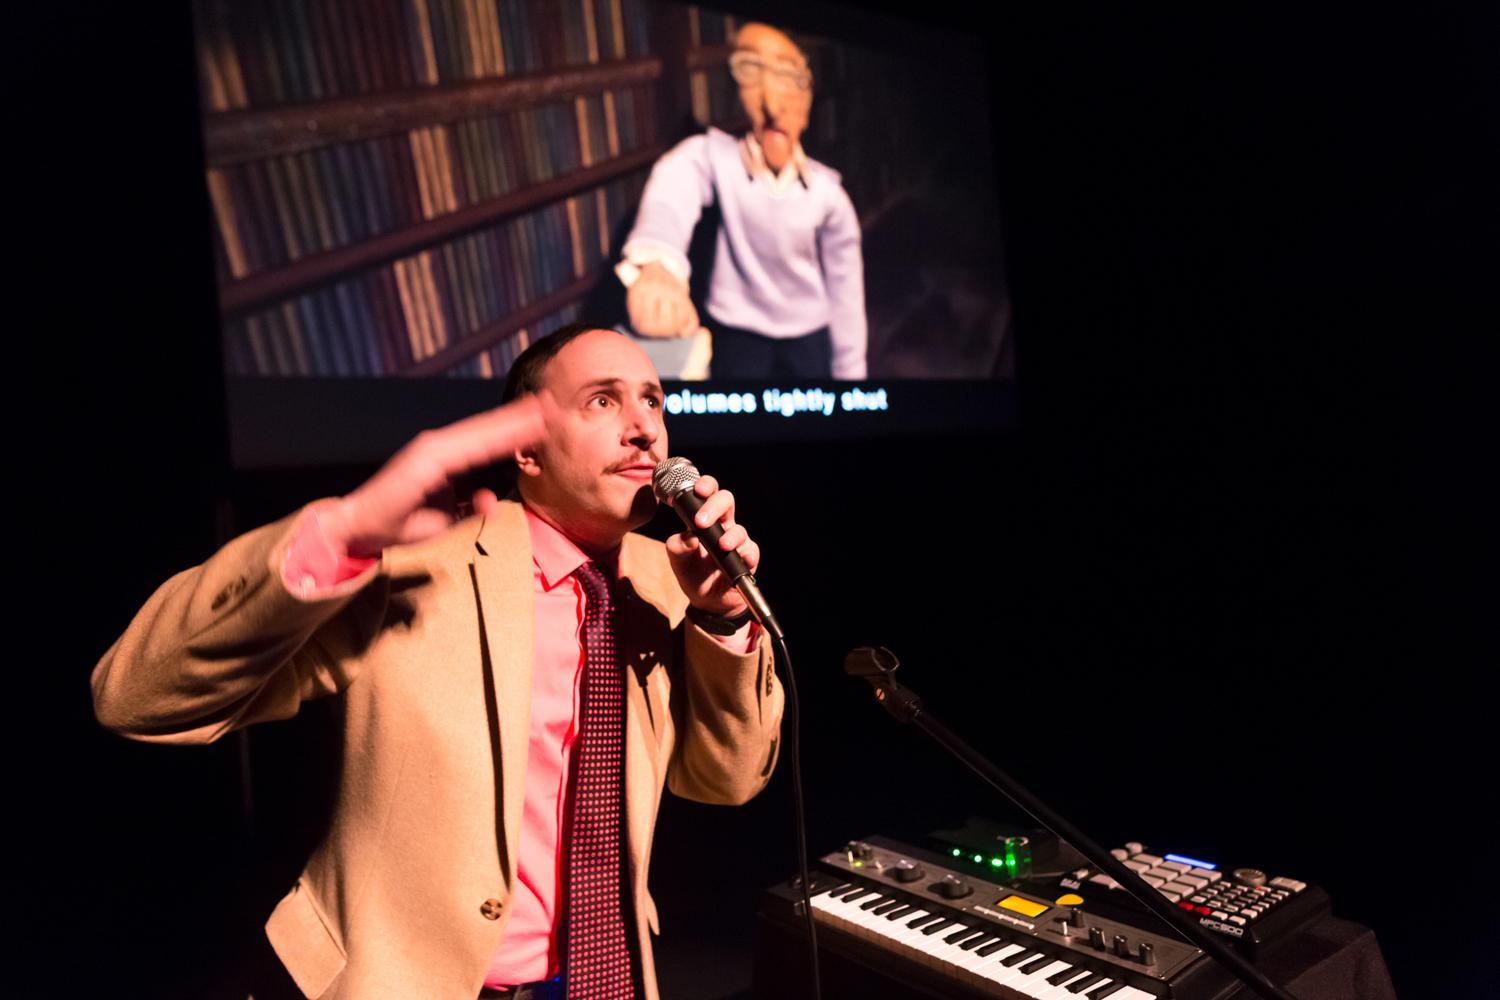 A man in a suit and tie stands near an electronic keyboard, gesturing with one hand and holding a microphone in the other. A video of an old man is projected in the background.